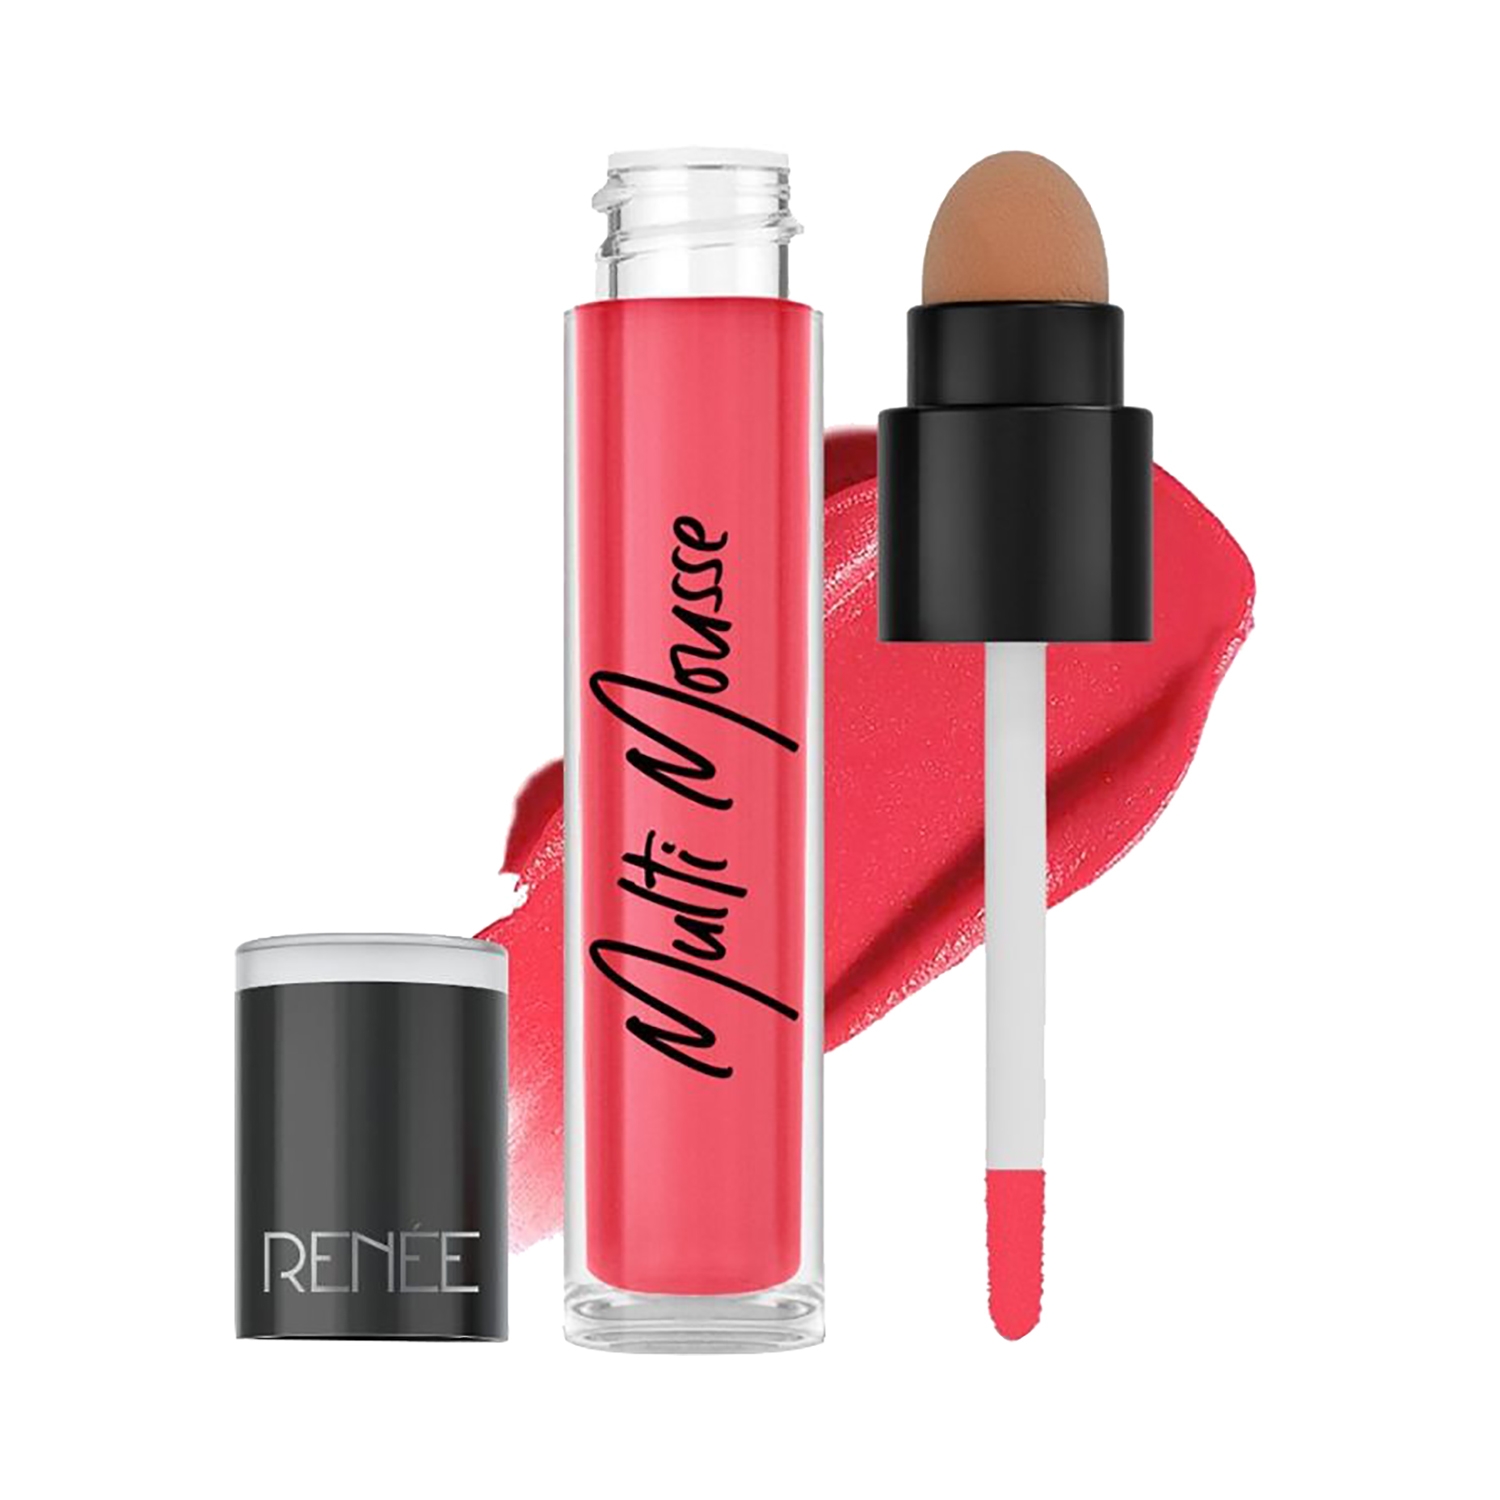 RENEE Multi-Mousse Lip Stain - MO 05 Pink Pudding (5g)